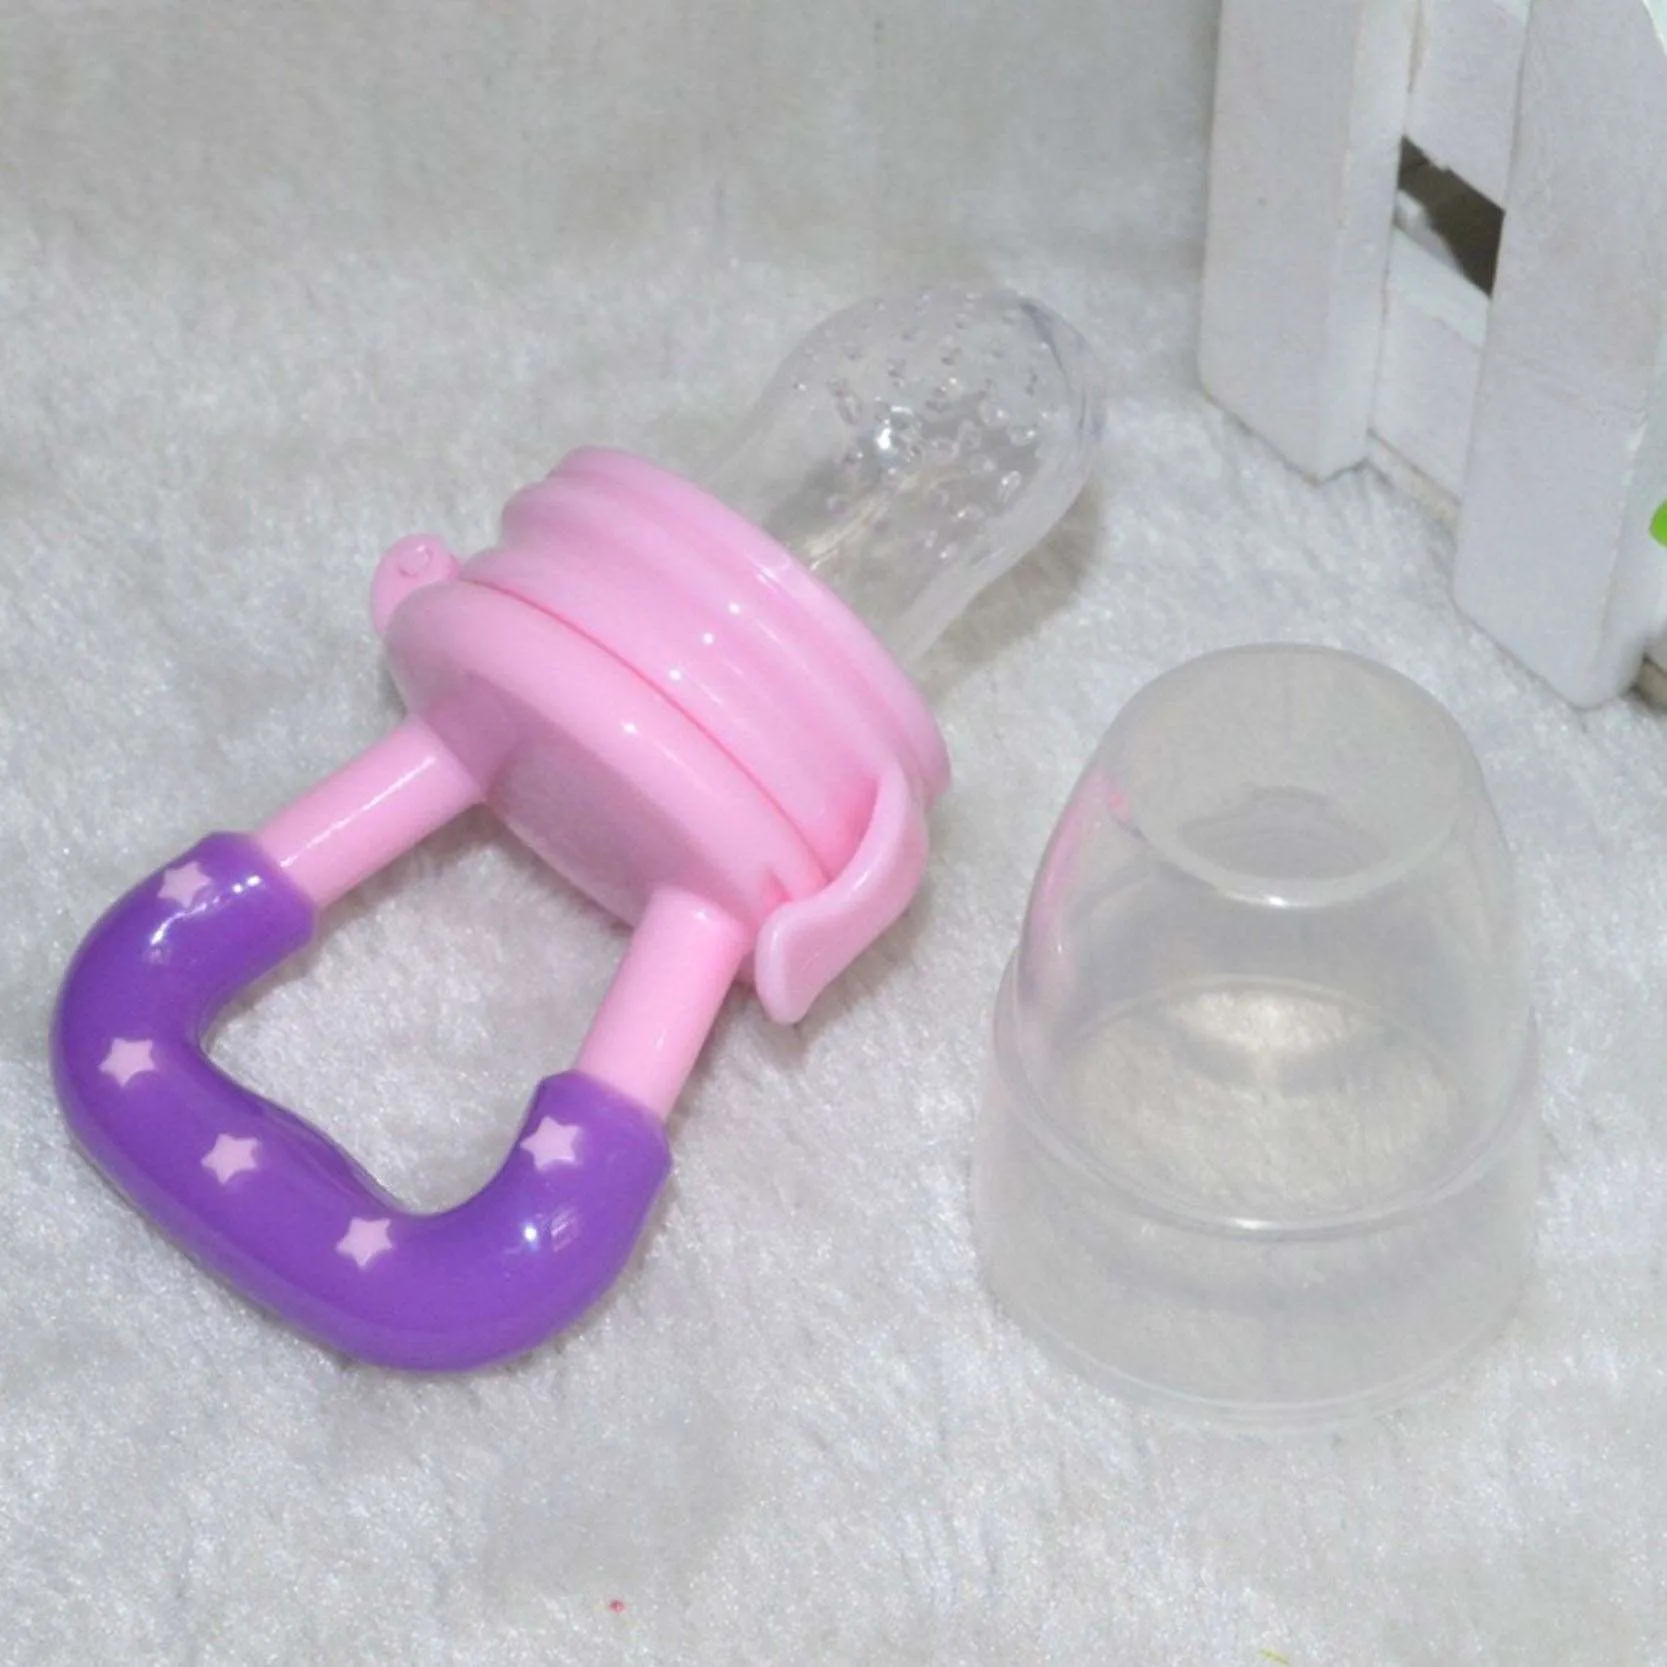 New 2015 High Quality Baby Pacifier Feeding Dummies Soother Nipples Soft Feeding Tool Bite Gags Boys and Girls JIA710